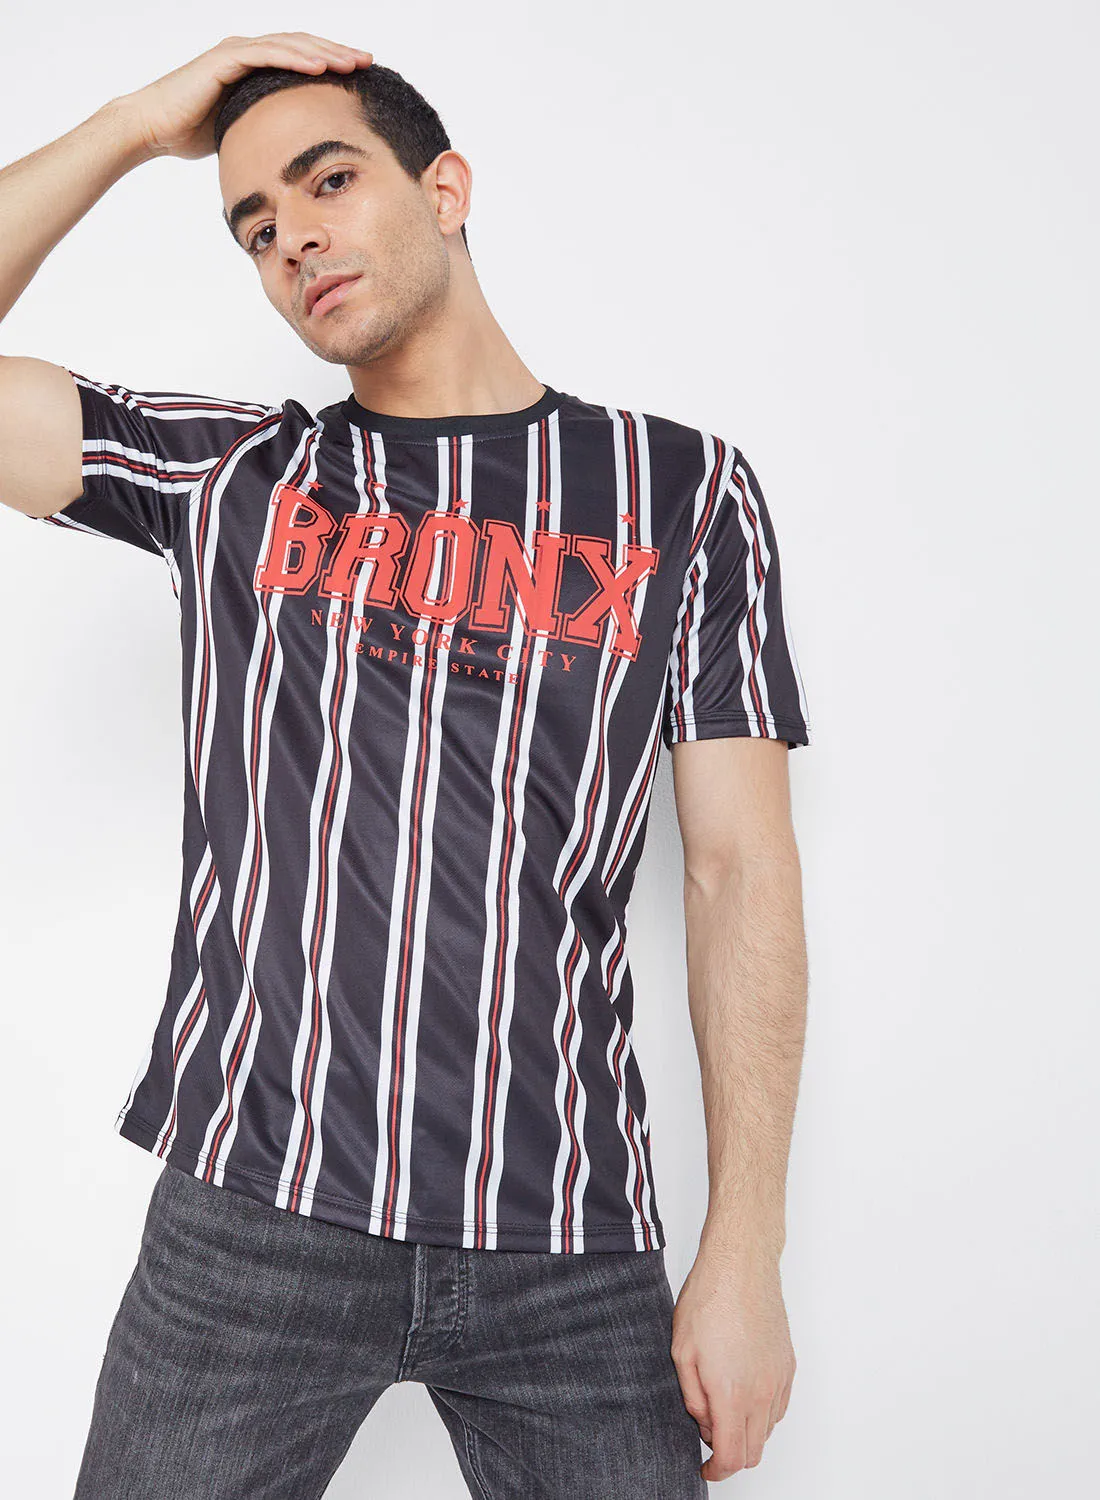 R&B Slim Fit Striped T-Shirt With Round Neck And Short Sleeves Black